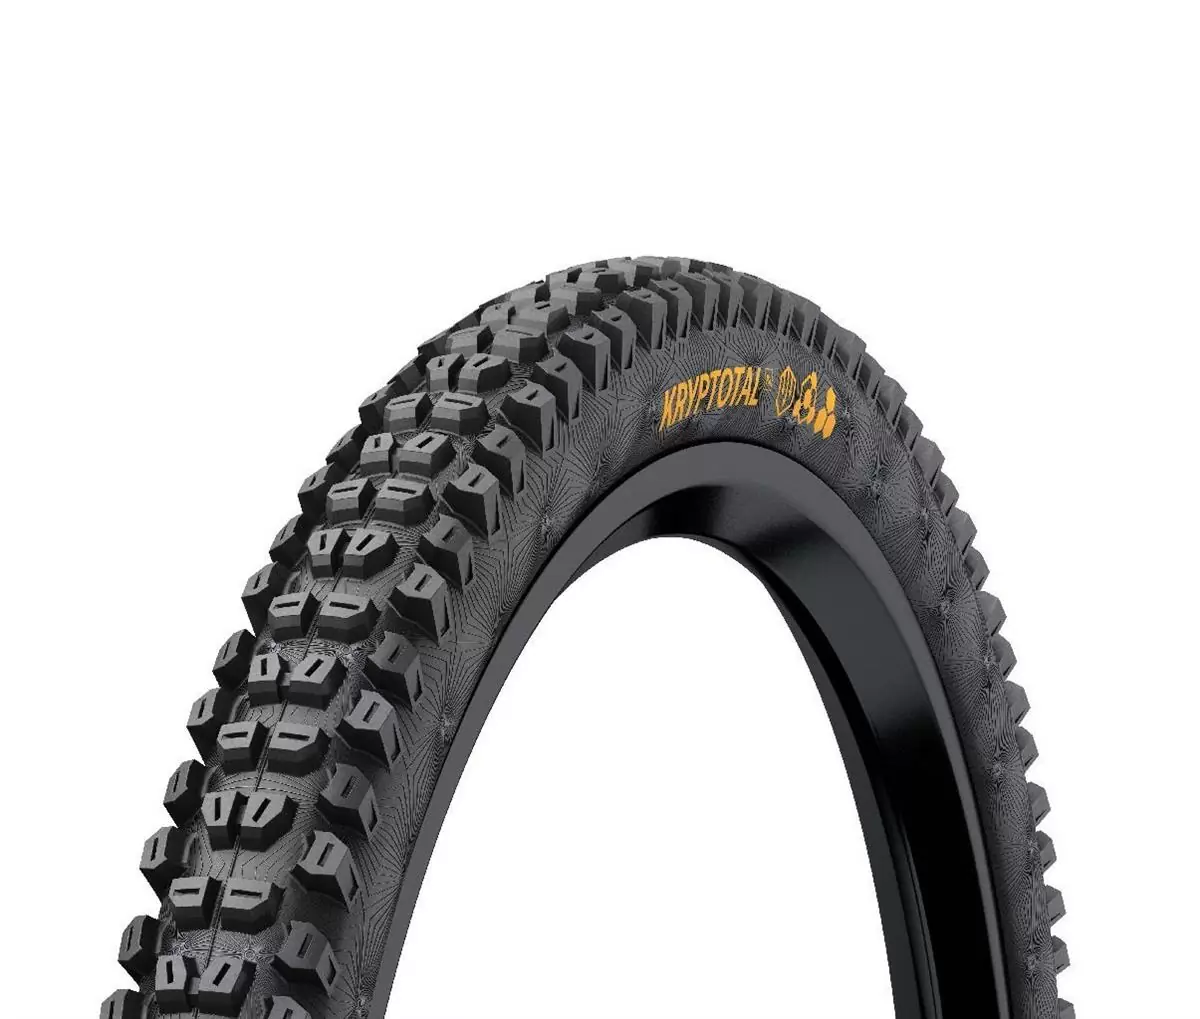 Kryptotal-R 29x2.60 Endurance-Compound/Trail Casing Folding Tubeless ready Tire - image